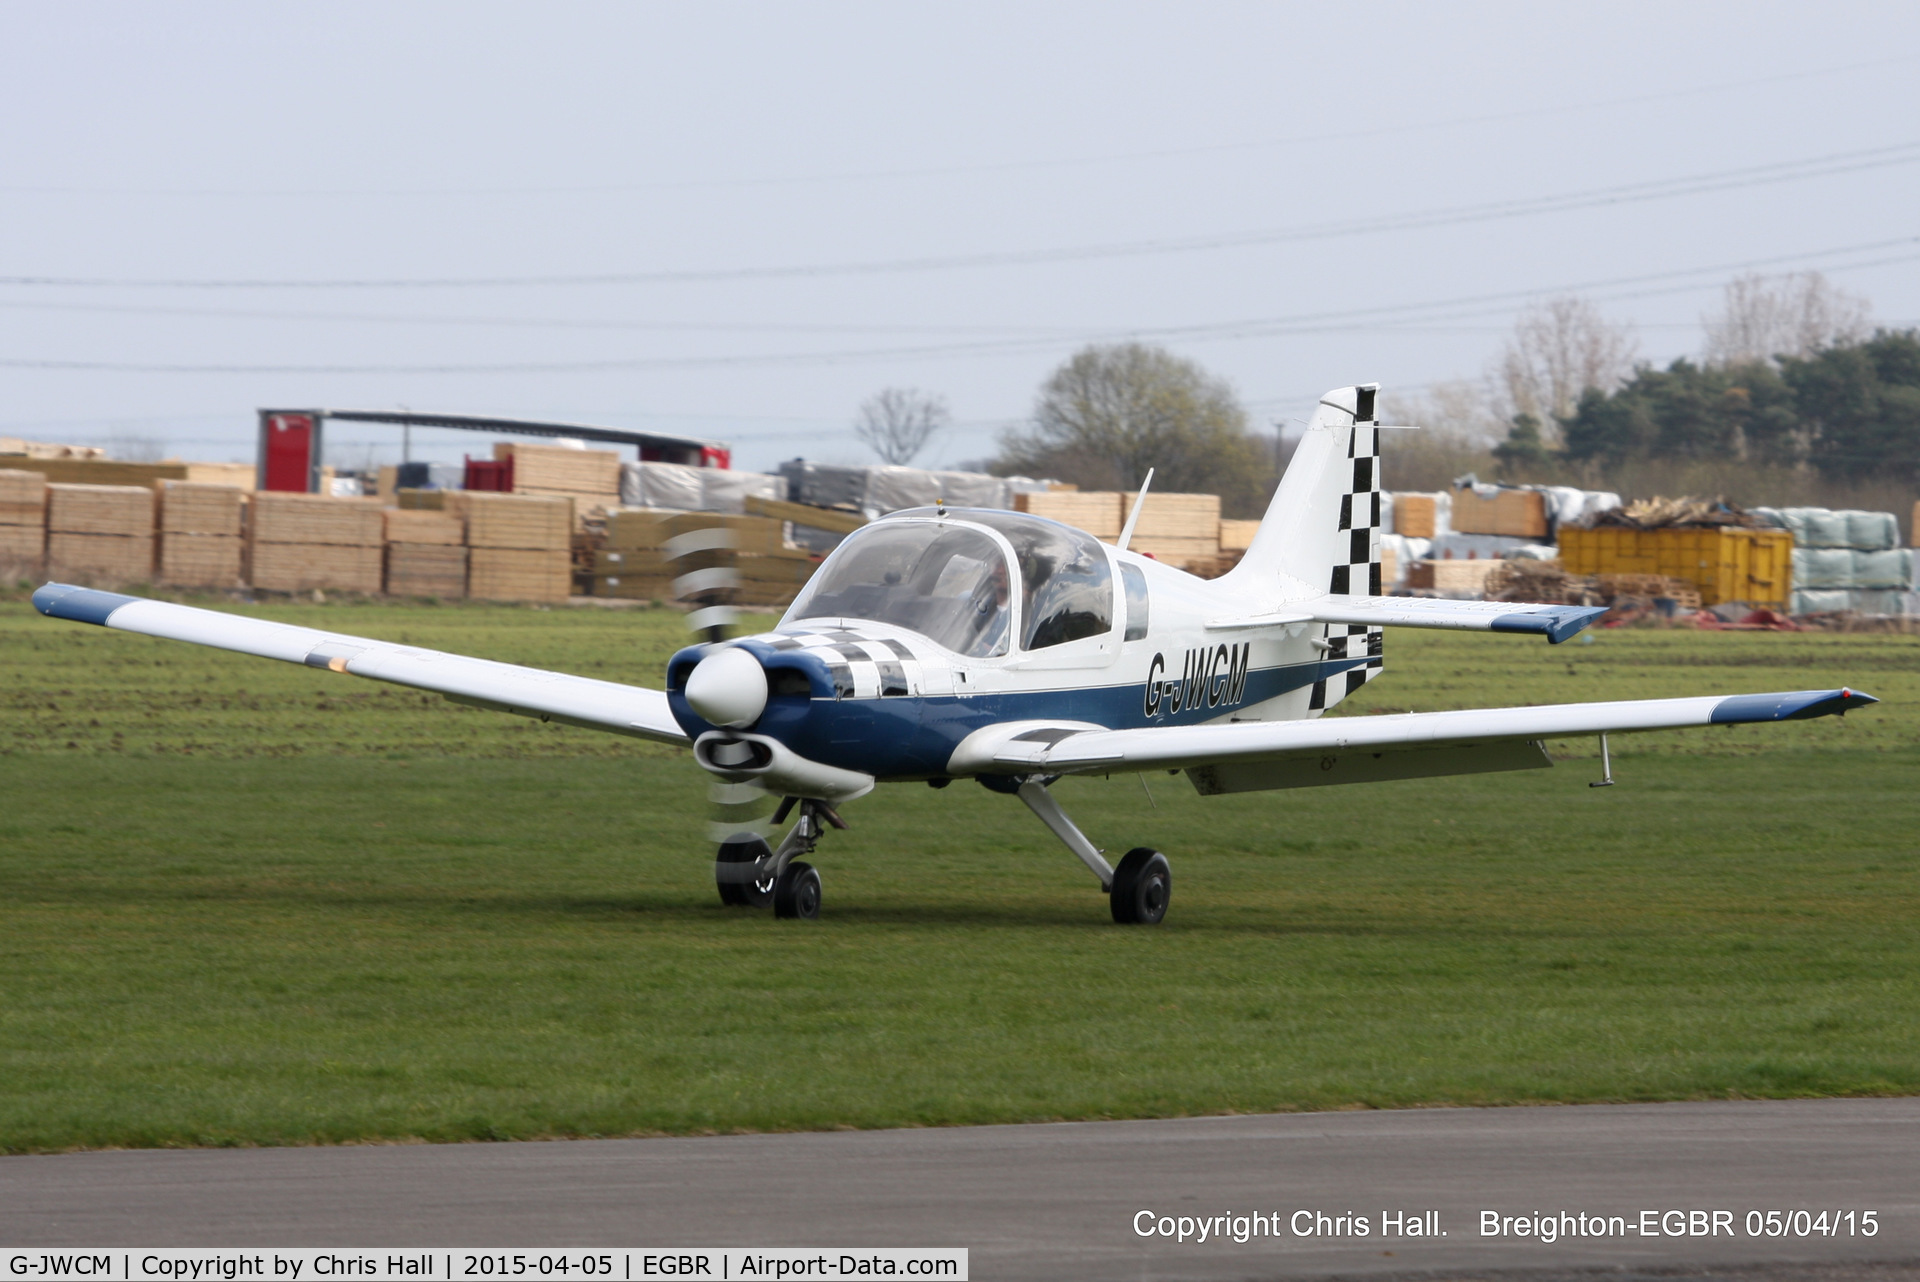 G-JWCM, 1980 Scottish Aviation Bulldog Series 120 Model 1210 C/N BH120/408, at the Easter Homebuilt Aircraft Fly-in